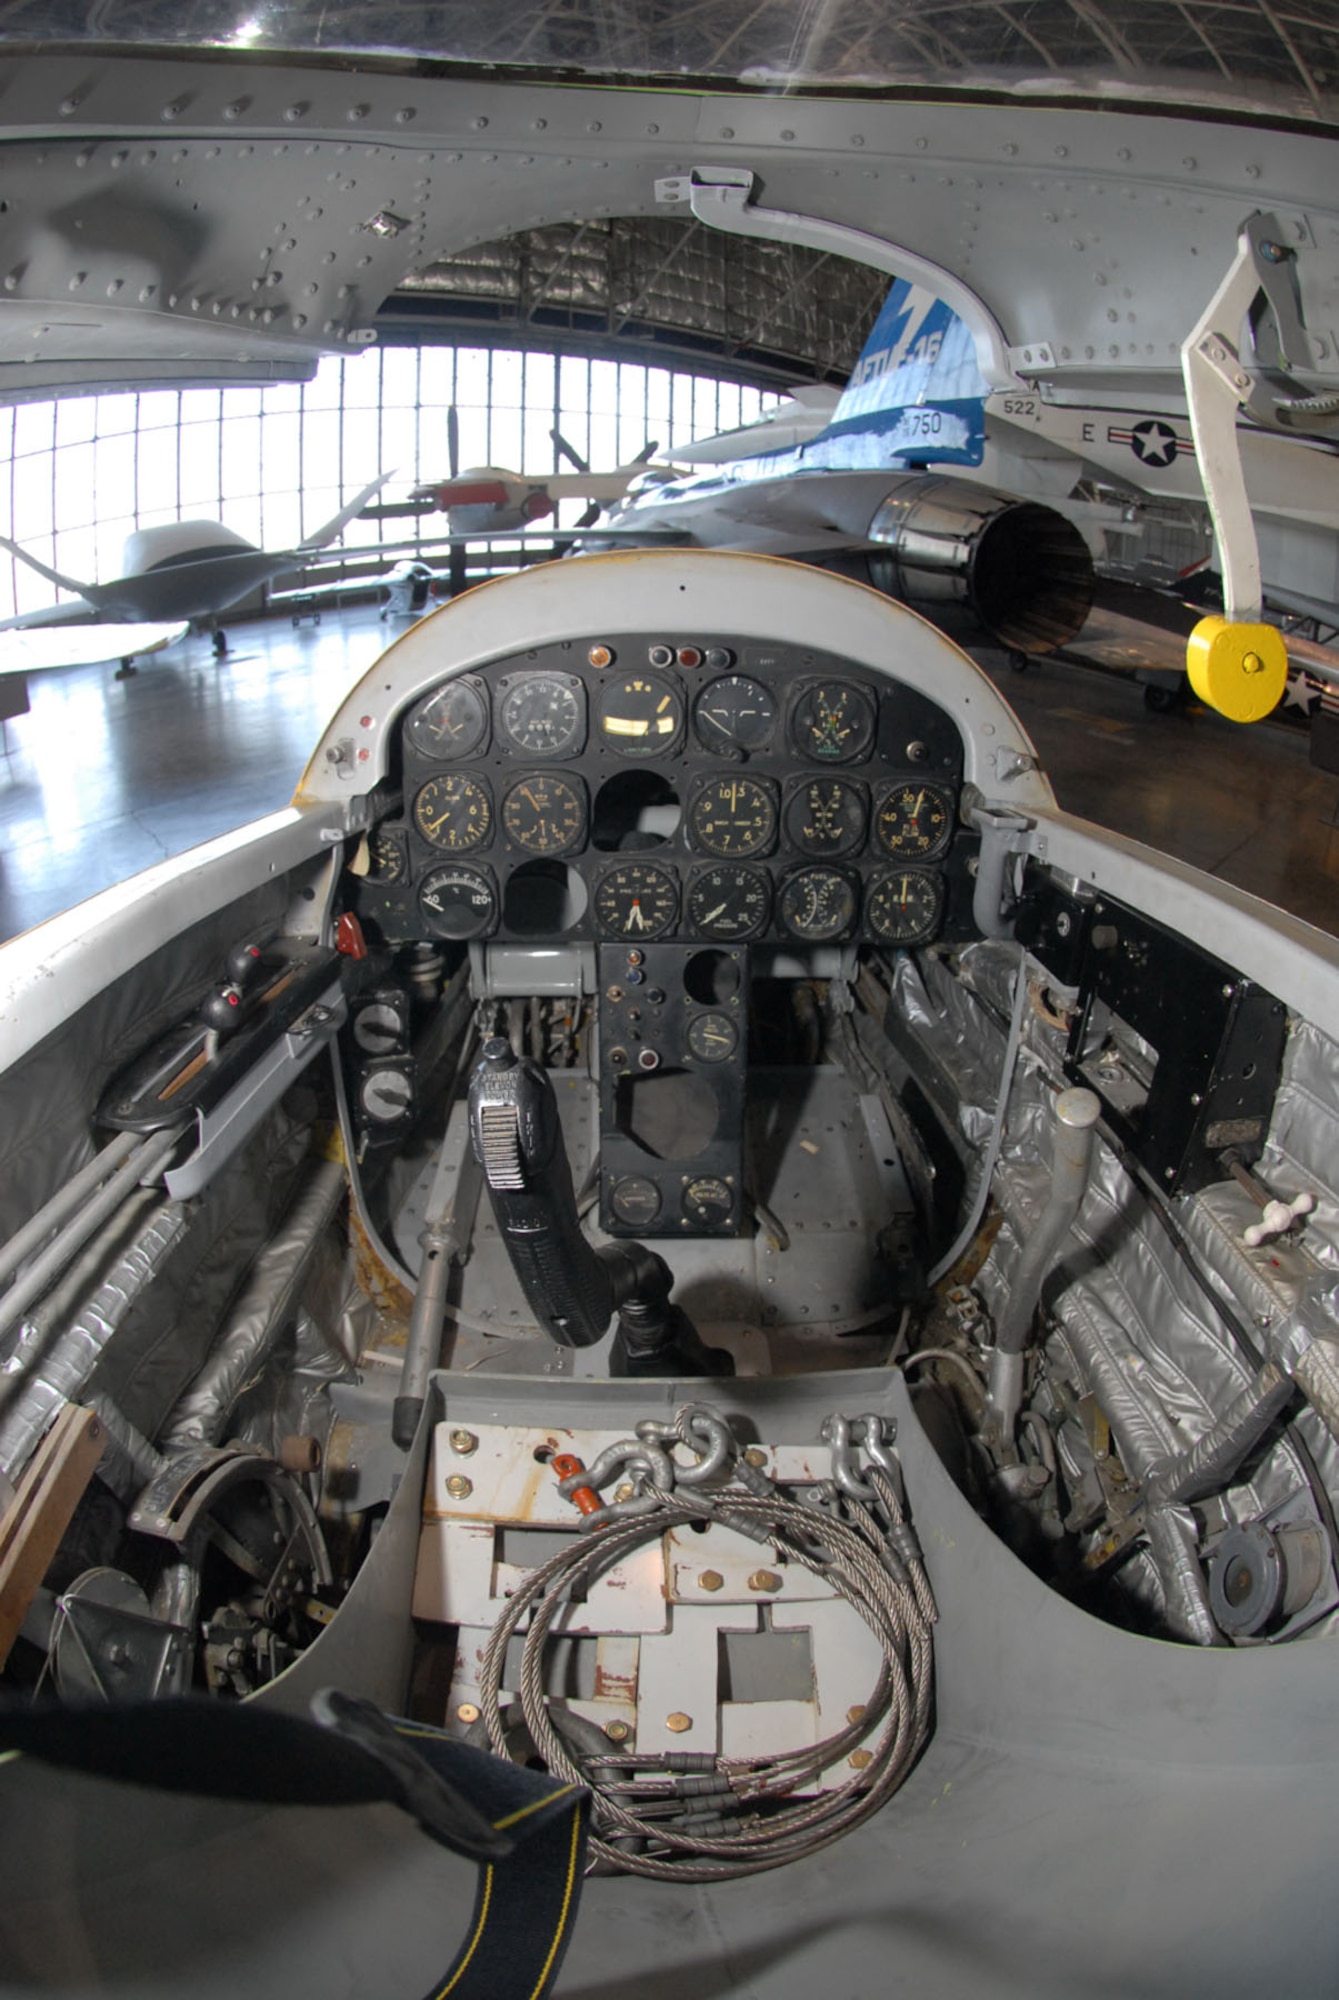 DAYTON, Ohio - The cockpit of the Northrop X-4 in the Research & Development Gallery at the National Museum of the U.S. Air Force. (U.S. Air Force photo)